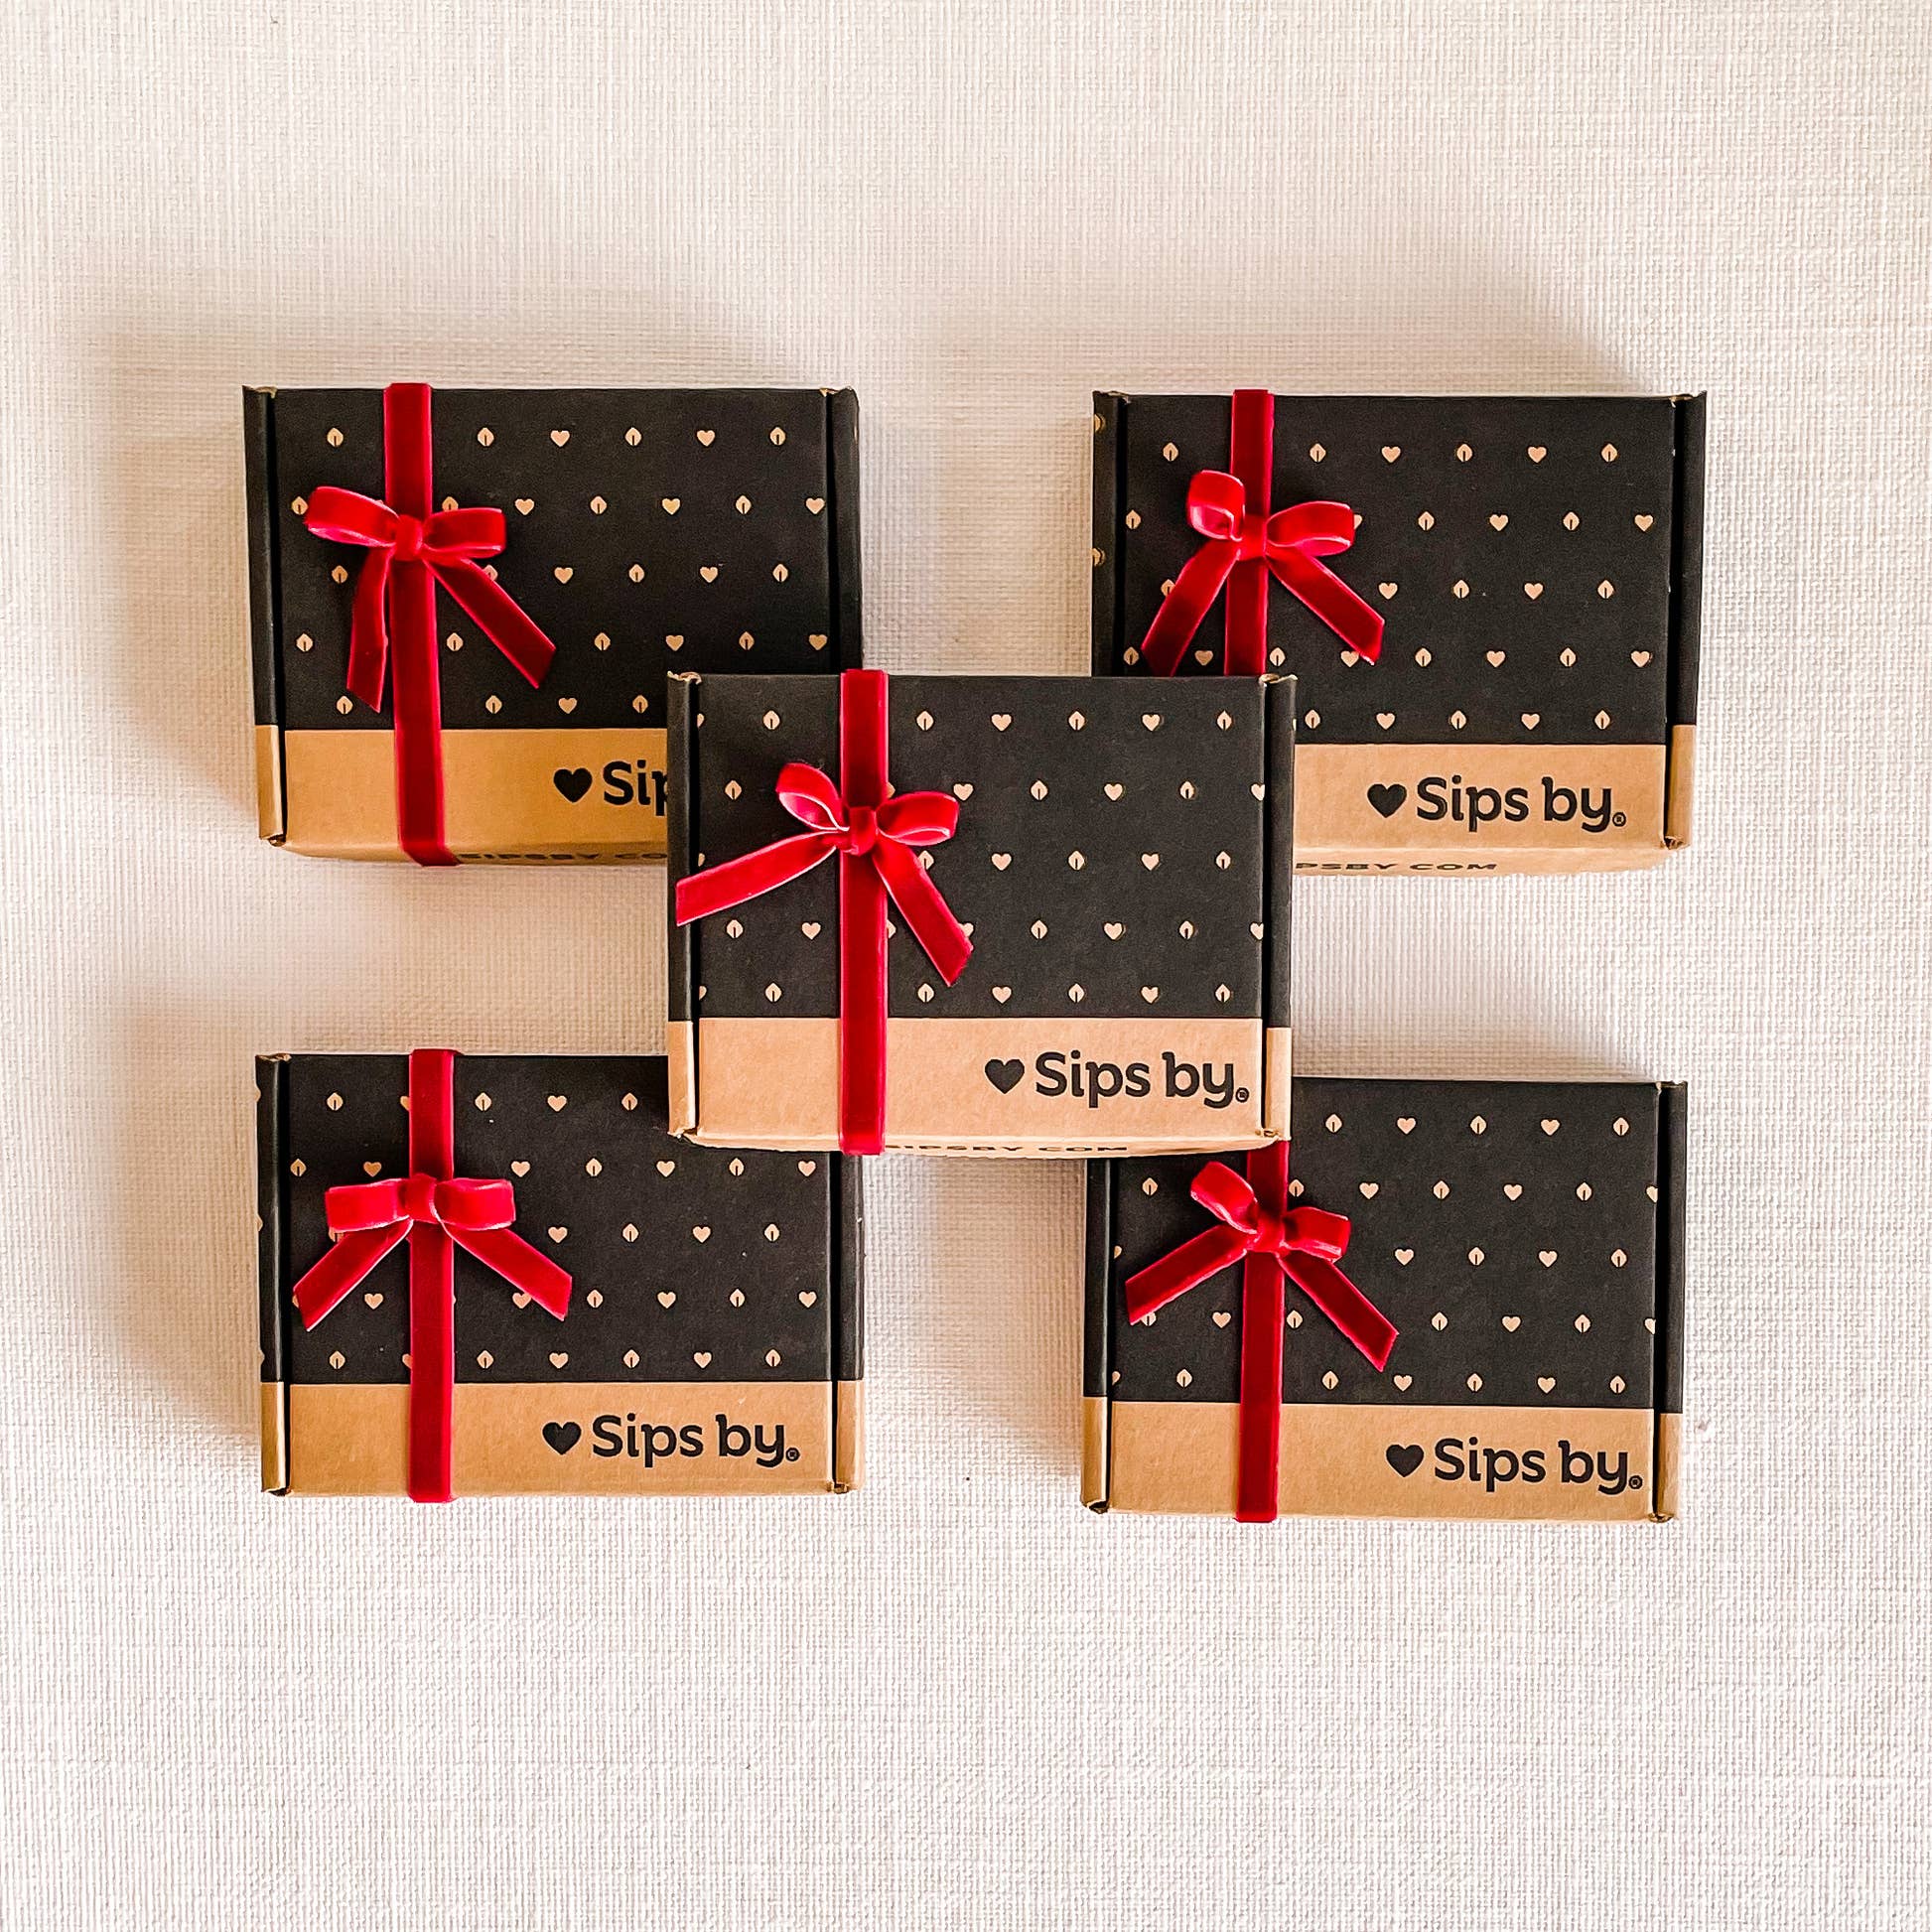 5 mini Sips by boxes with red velvet bows